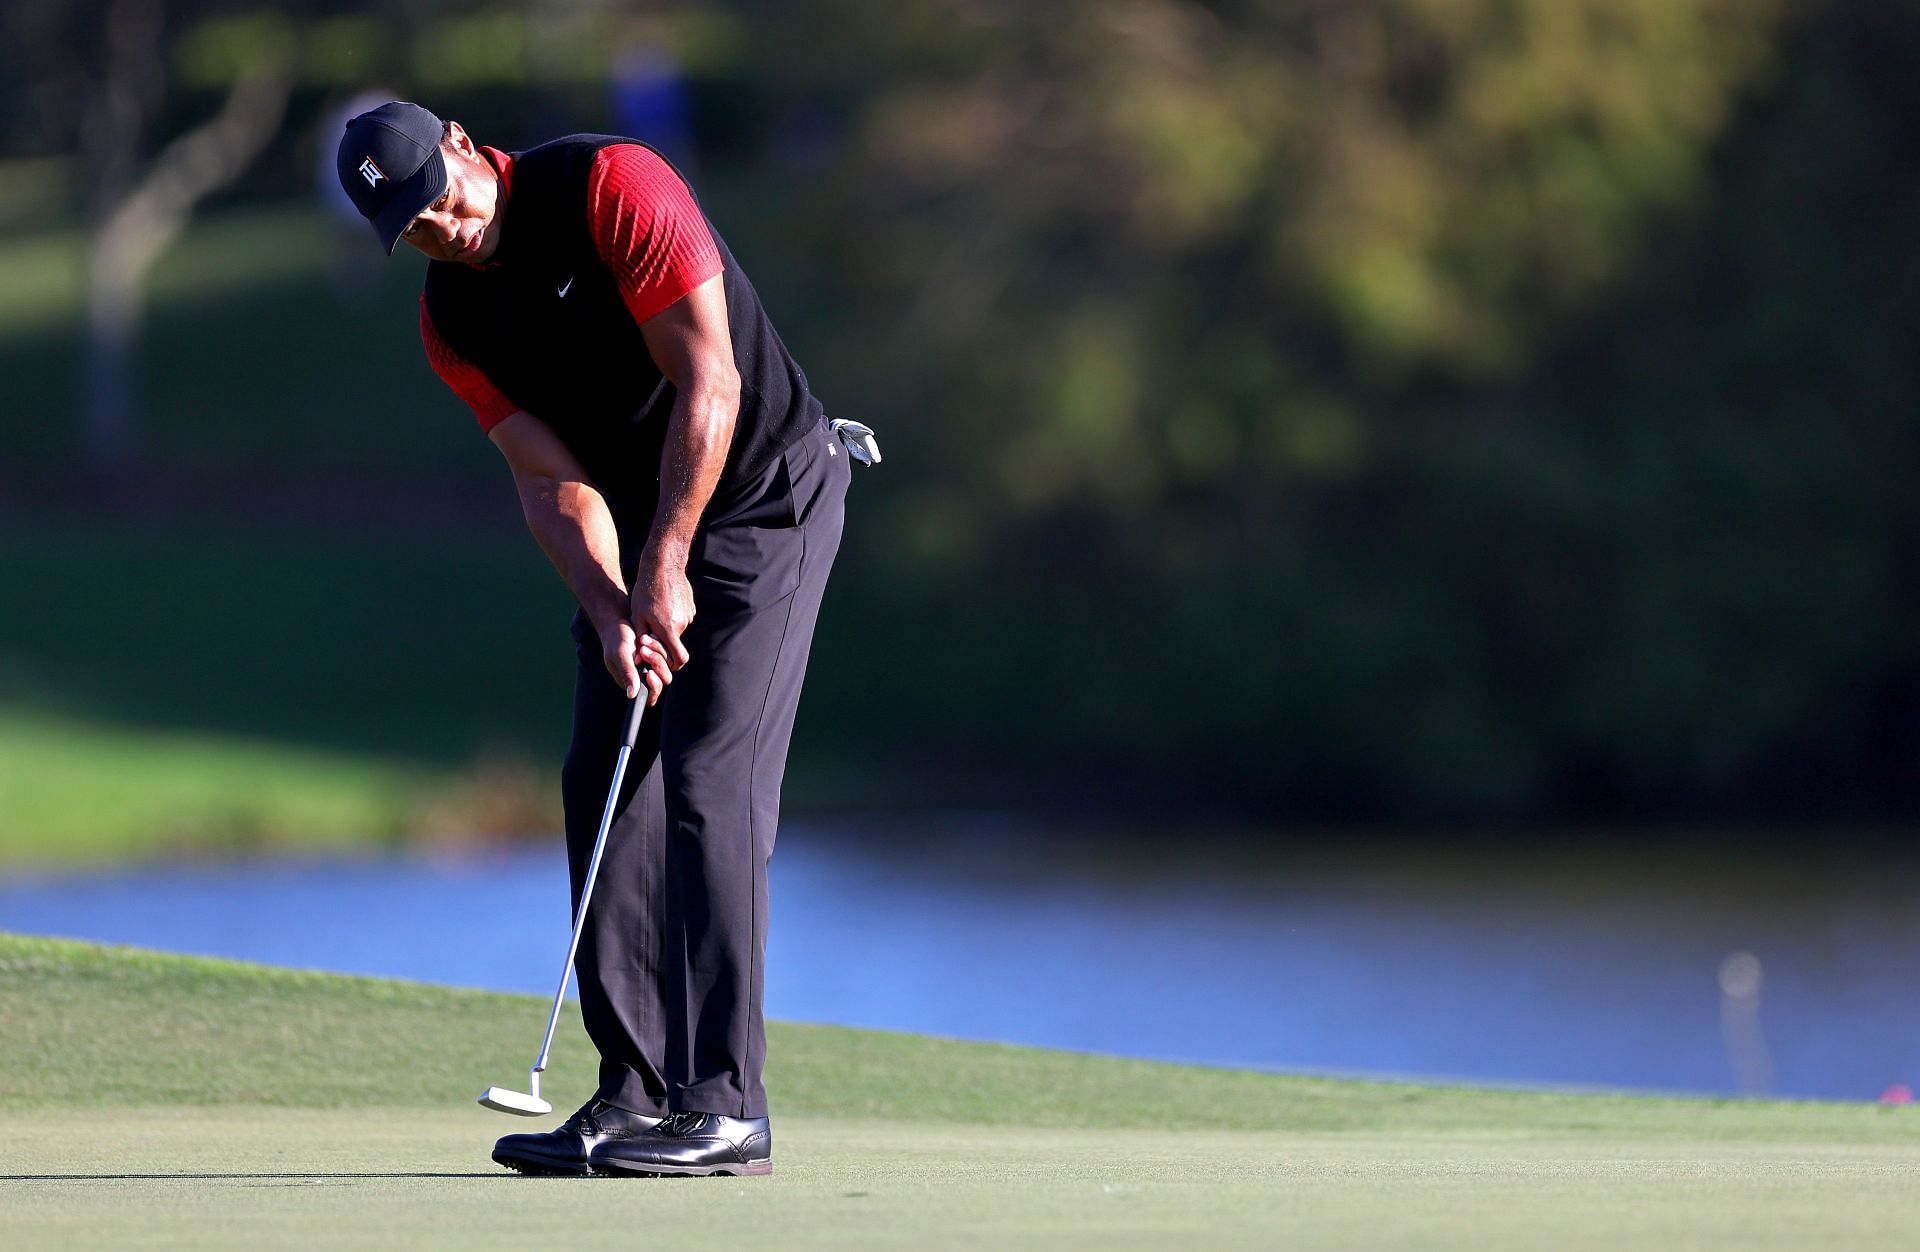 Tiger Woods is nearing retirement